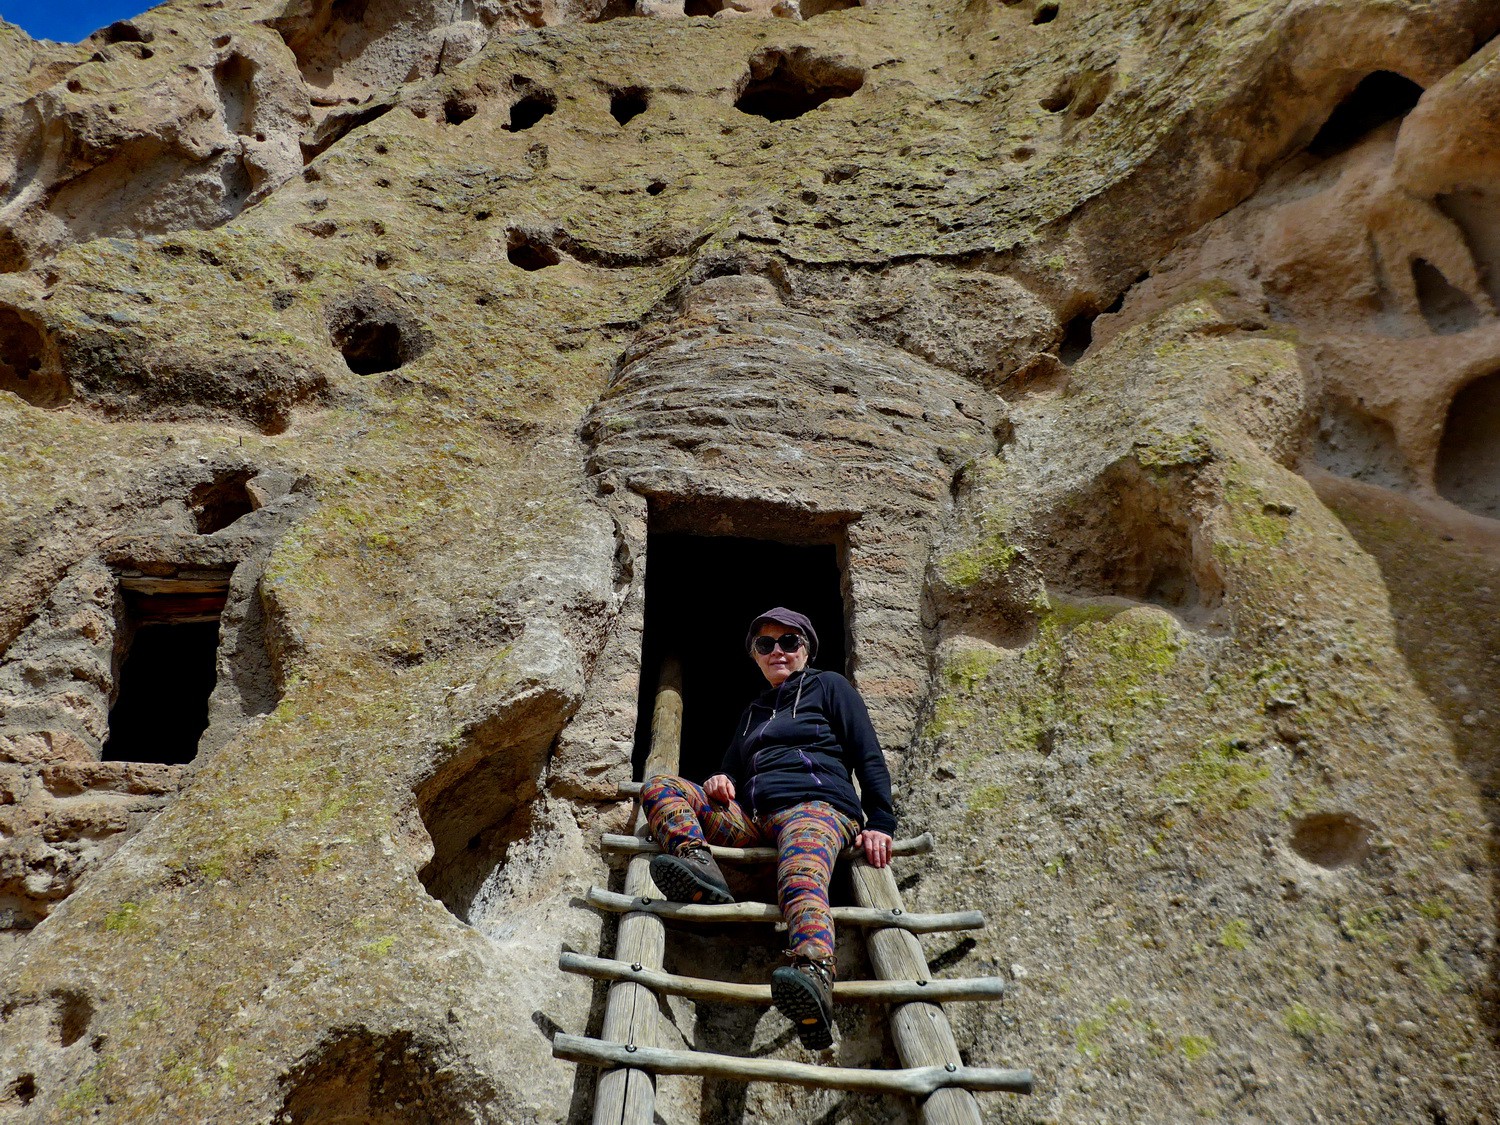 Marion in front of a cave house in the Frijoles Canyon in the Bandelier Natonal Monument